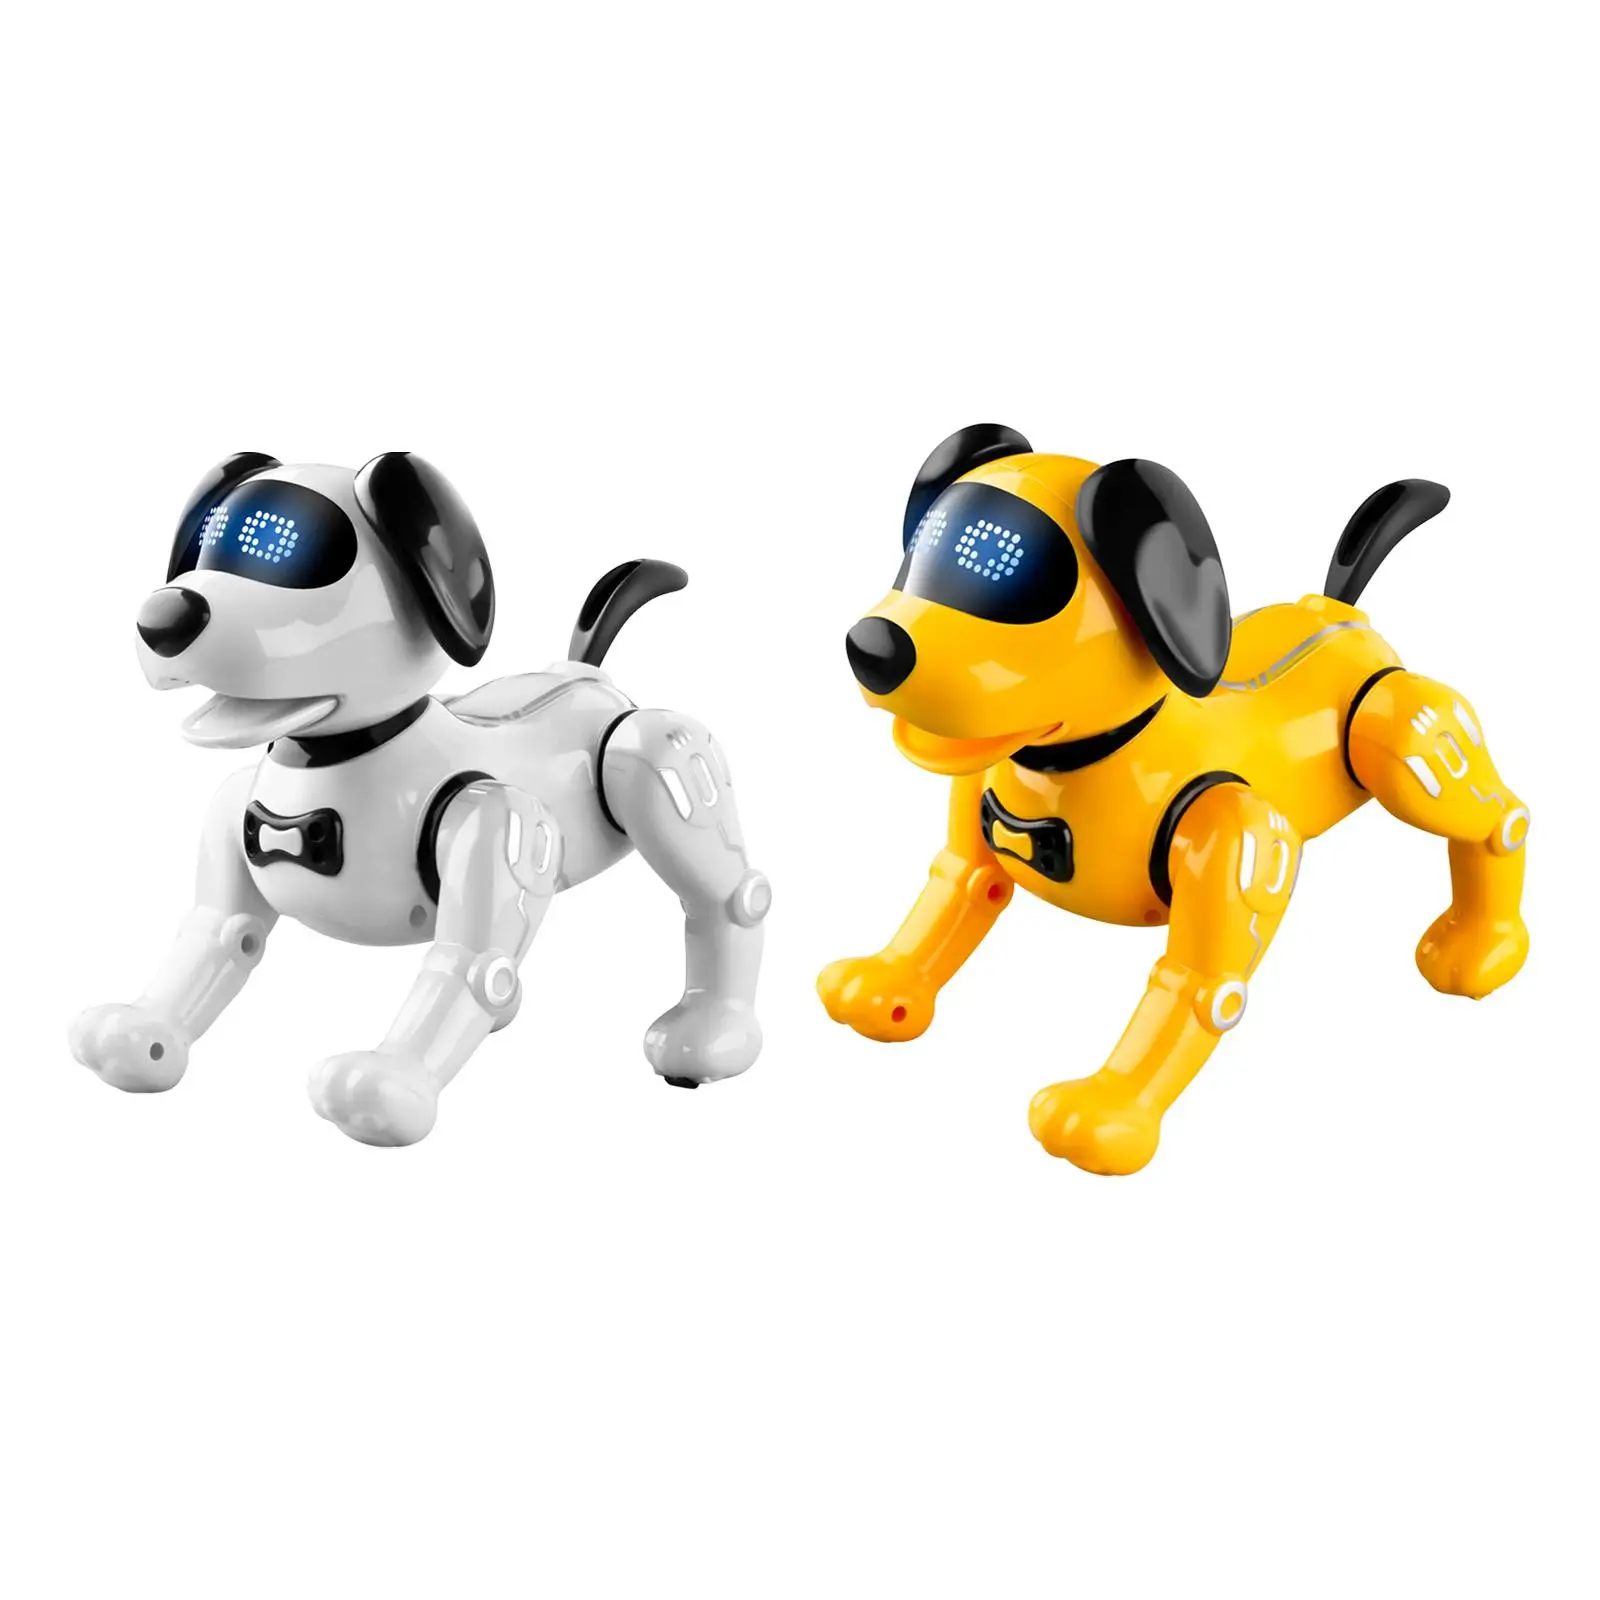 Remote Control Robot Dog Handstand Push up RC Robot Dog interactive Robotic Pet for Kids Boys and Girls Age 5 6 7 8 9 10